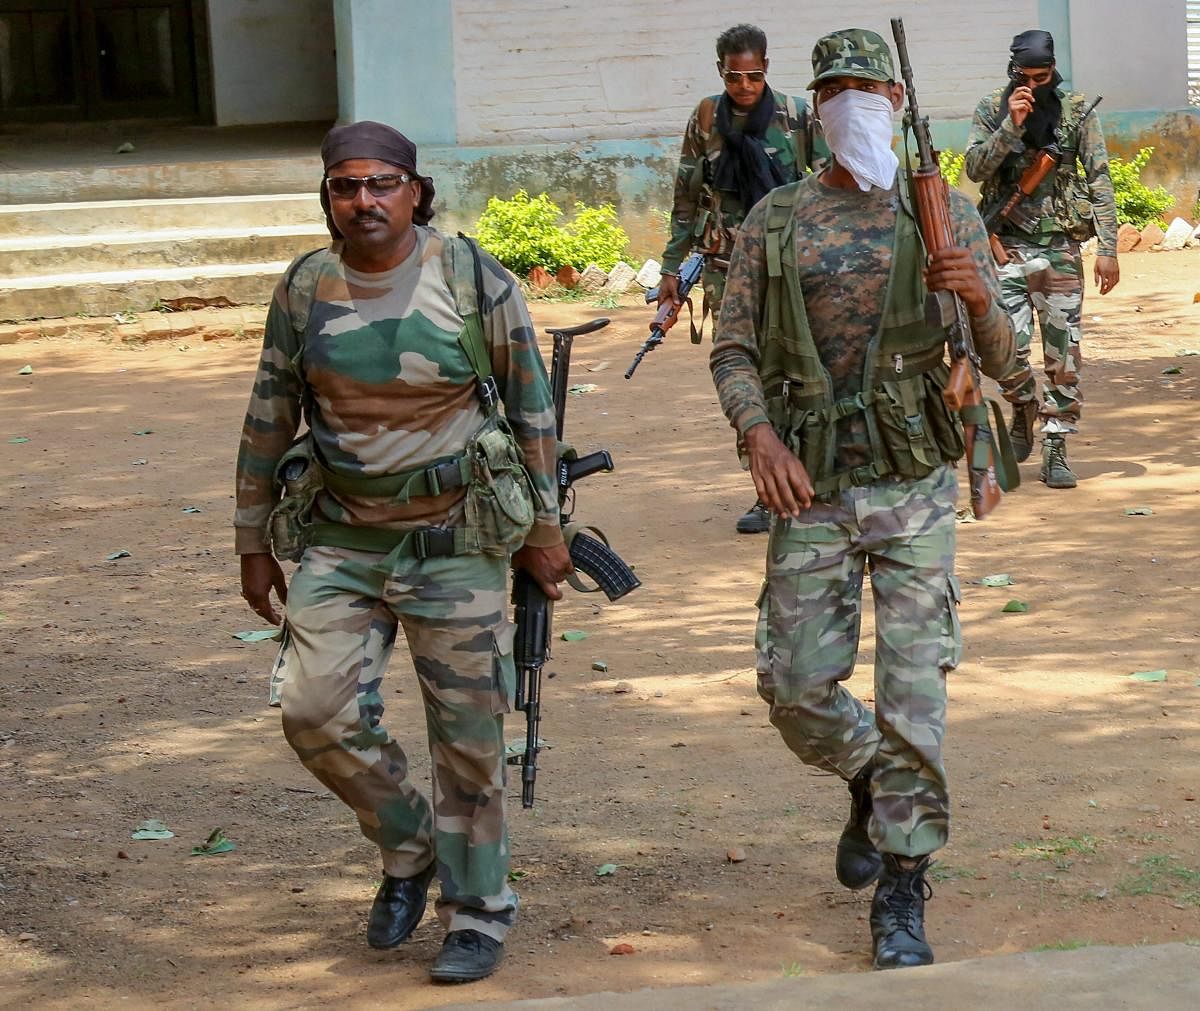 Home Ministry officials said the funds were released as part of a central government scheme under which it reimburses all expenses incurred by the states while carrying out anti-Naxal operations. PTI File Photo